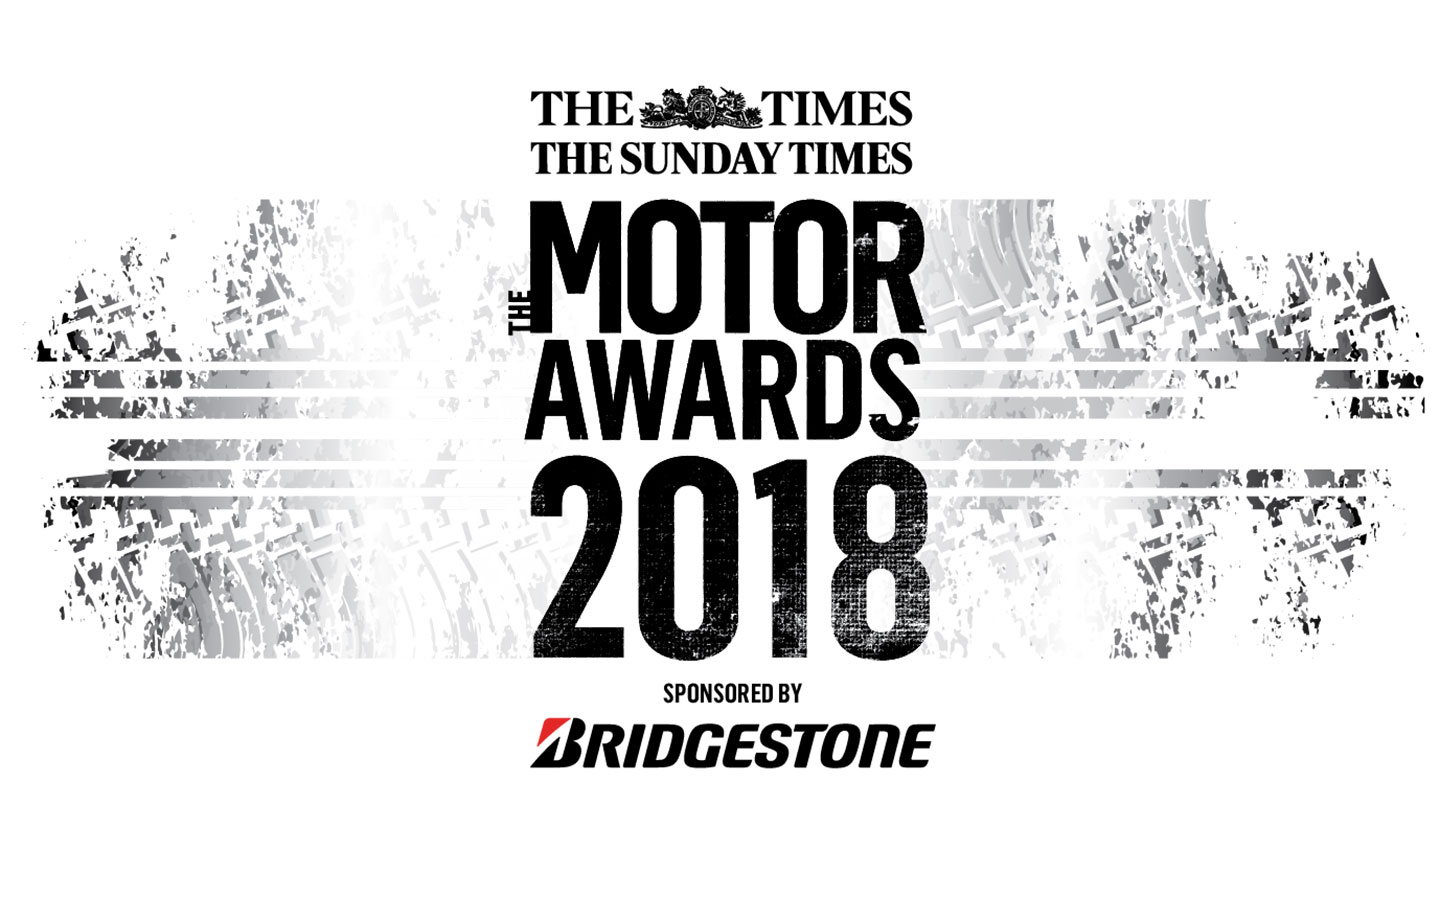 Vote now in The Sunday Times Motor Awards 2018 to win a holiday in Dubai